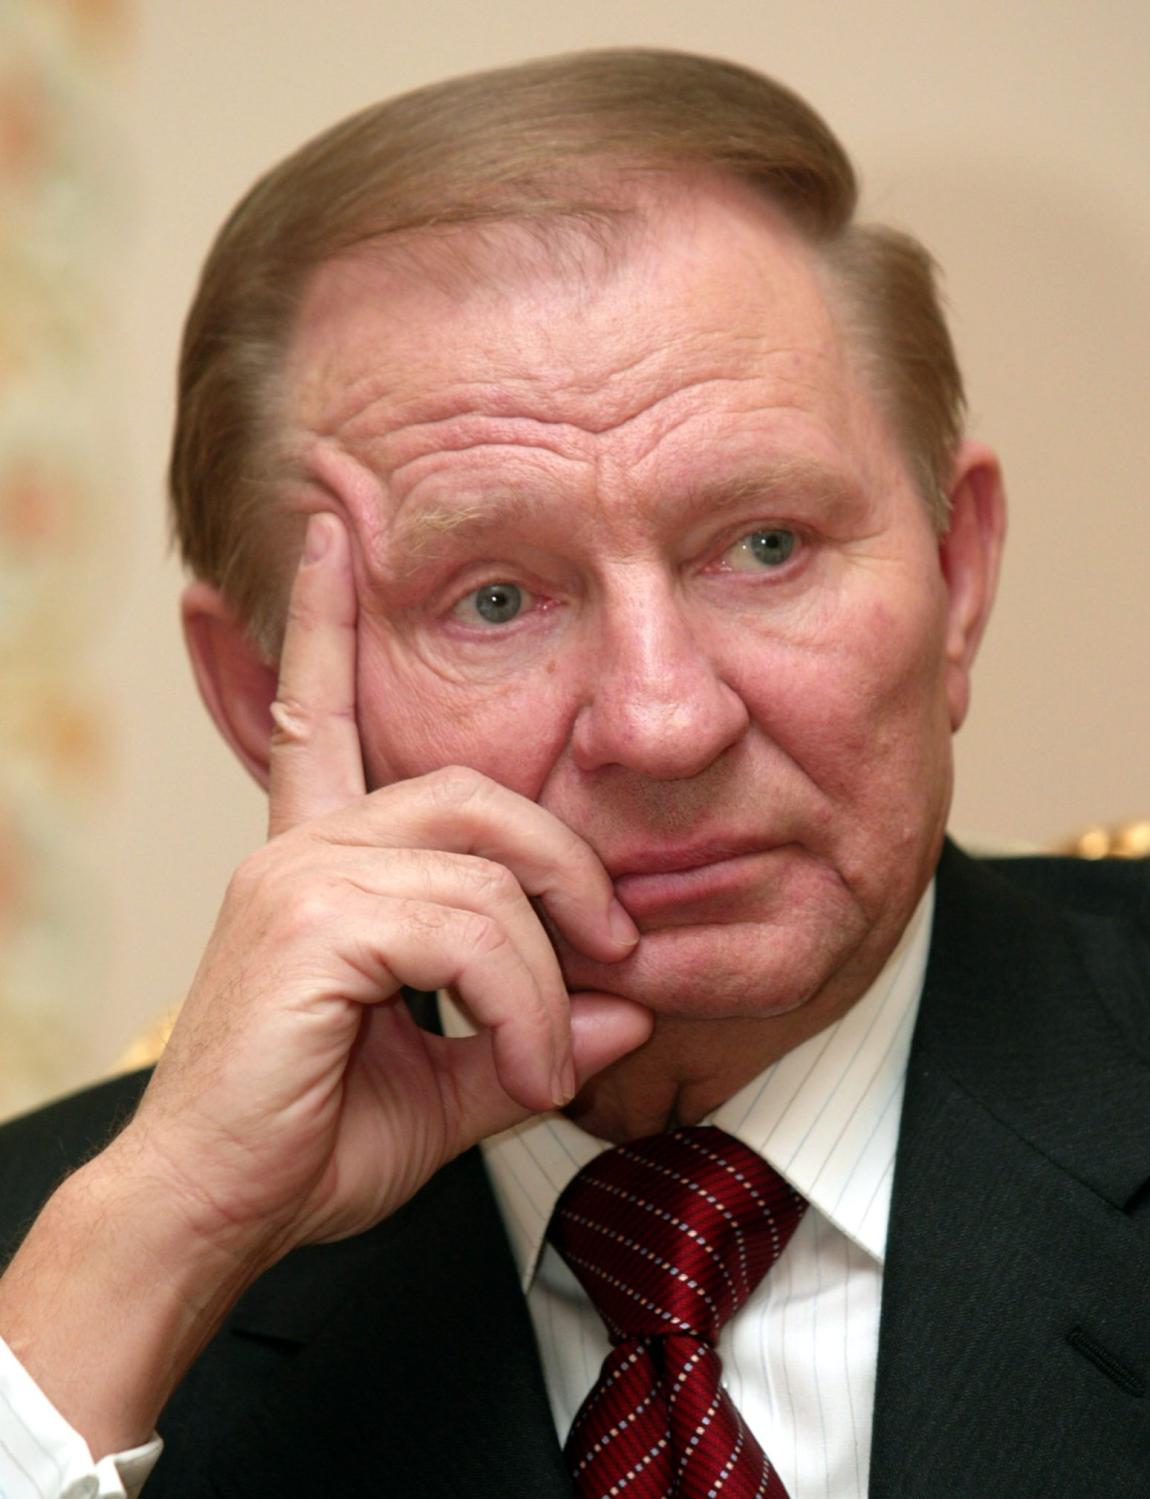 Ukrainian President Leonid Kuchma looks on during a meeting with Russian leader Vladimir Putin in Novo-Ogaryovo residence outside Moscow, March 17, 2004.